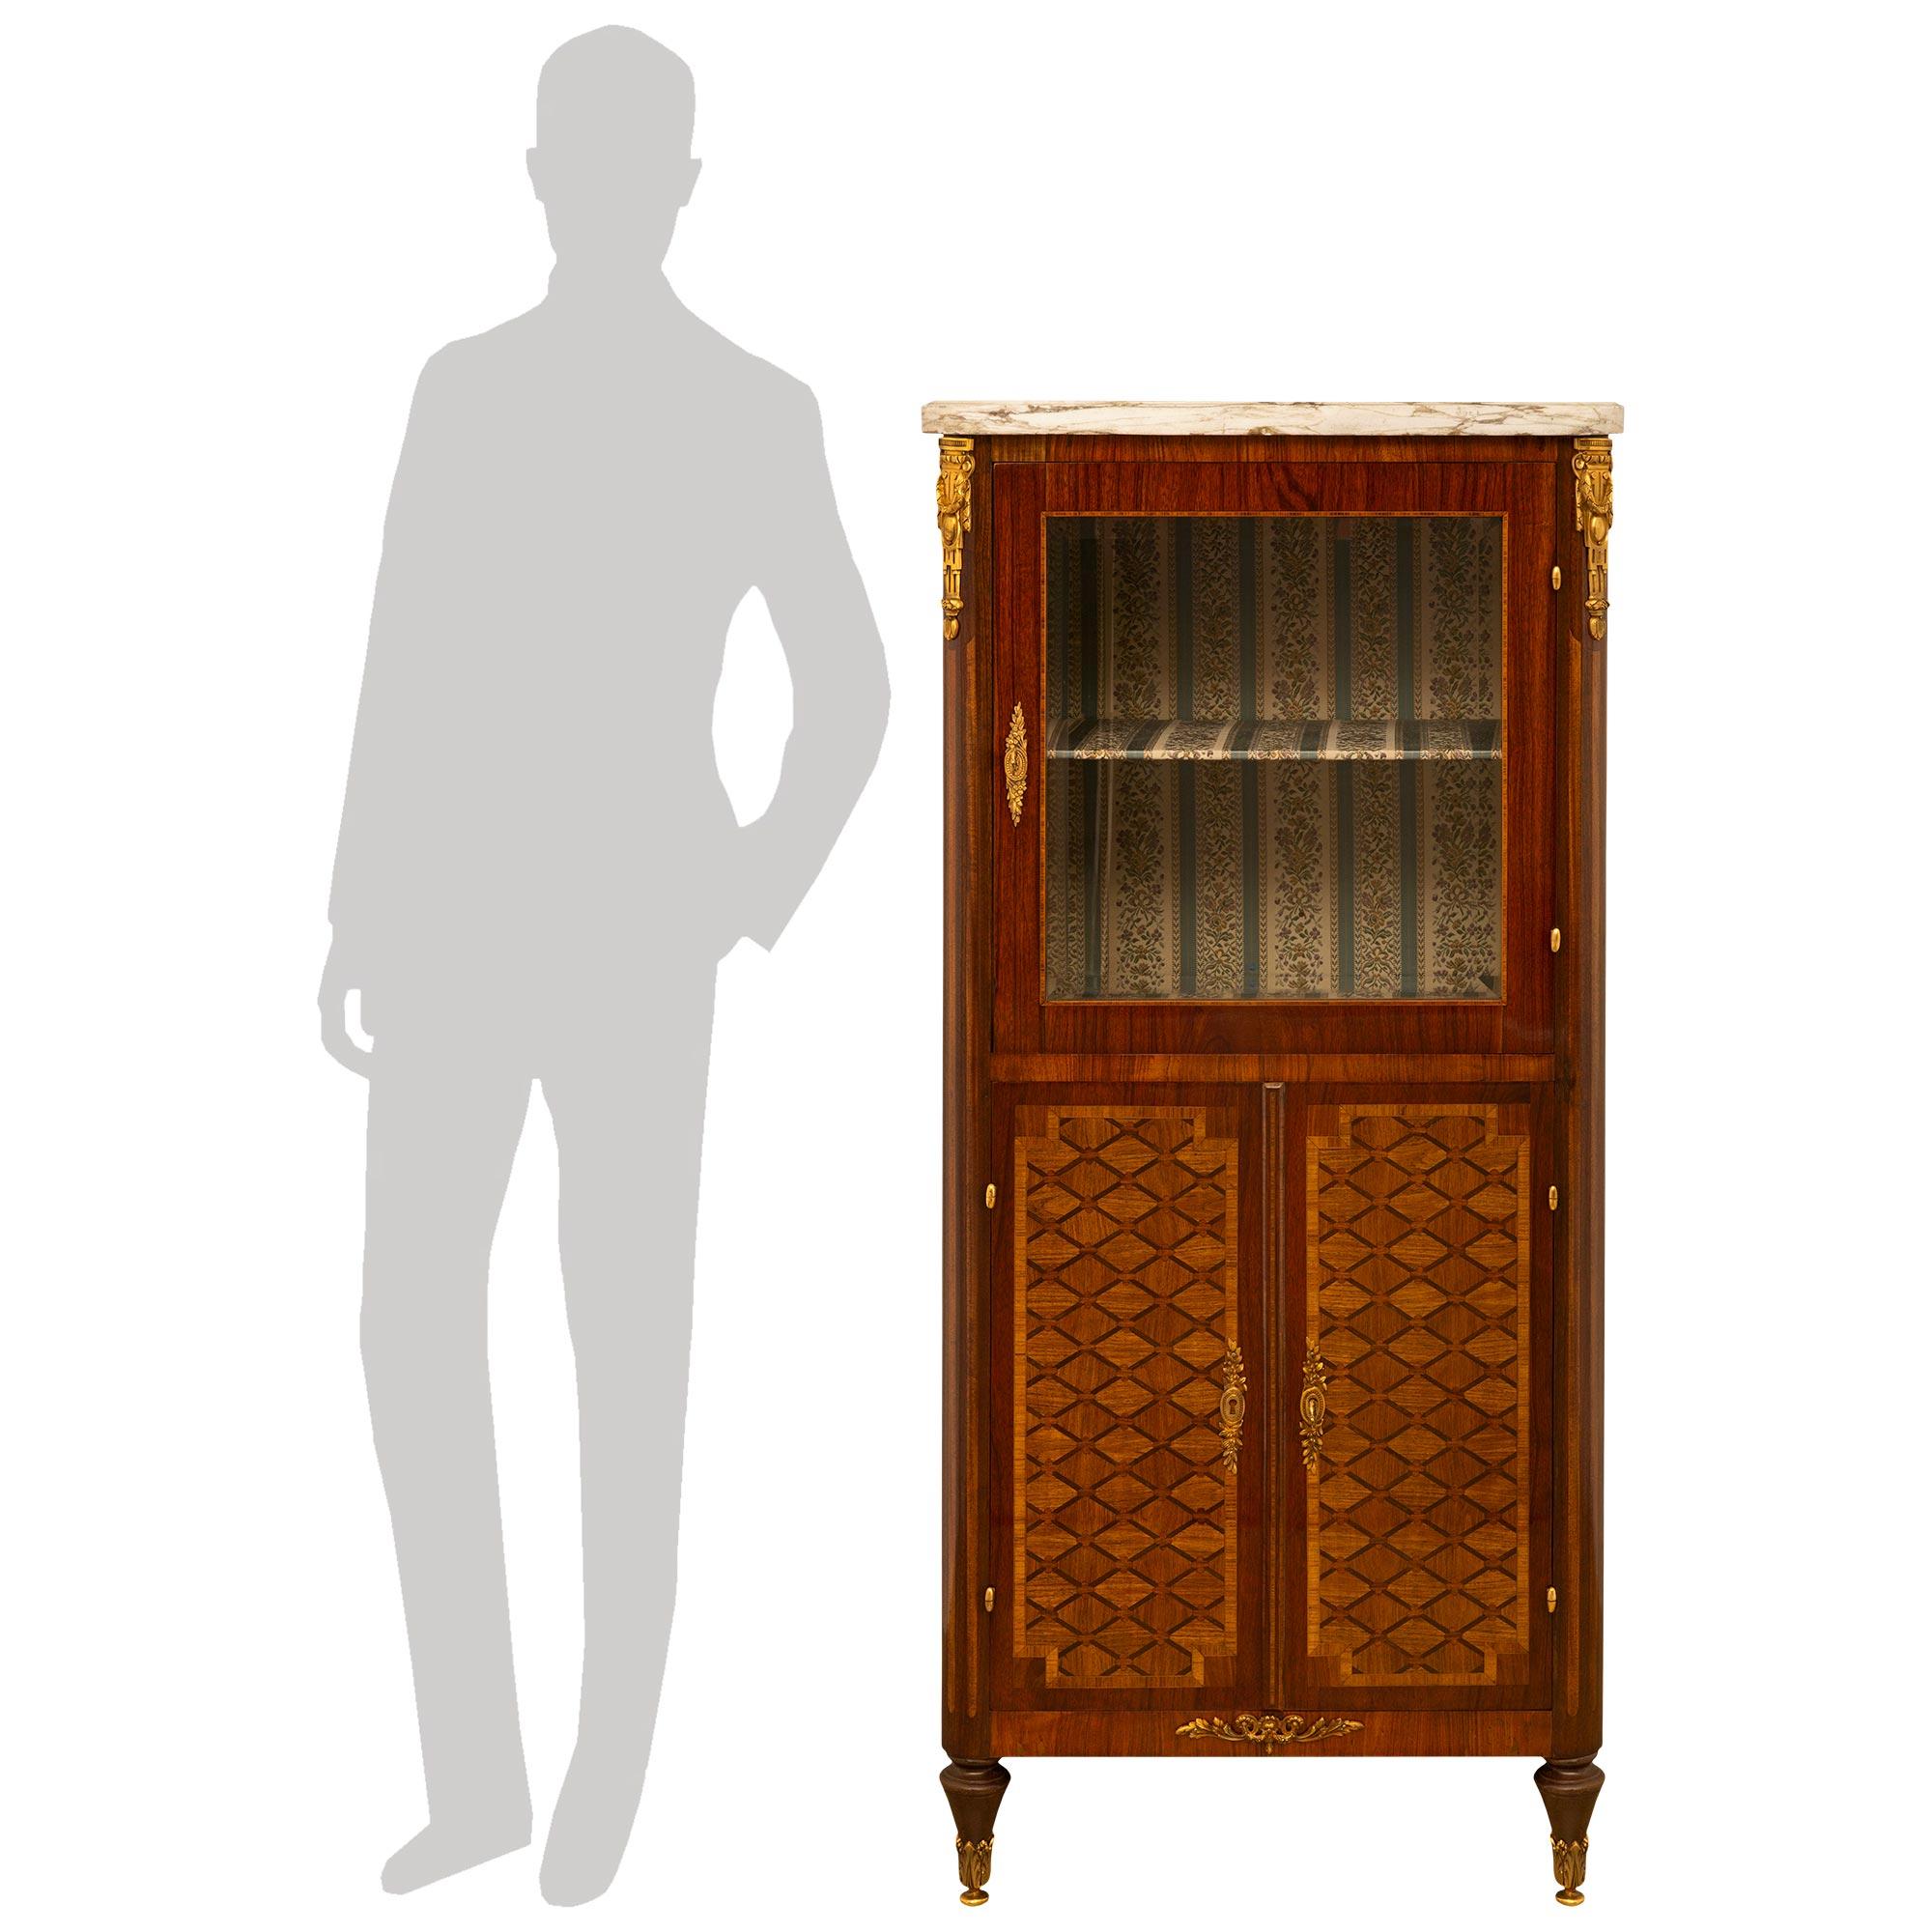 A French 19th Century Louis XVI st. Tulipwood, Kingwood and marble cabinet/vitrine. The vitrine is raised by topie shaped front legs and square tapered legs in the back, with all legs ending with decorative ormolu sabots. The legs flank the straight